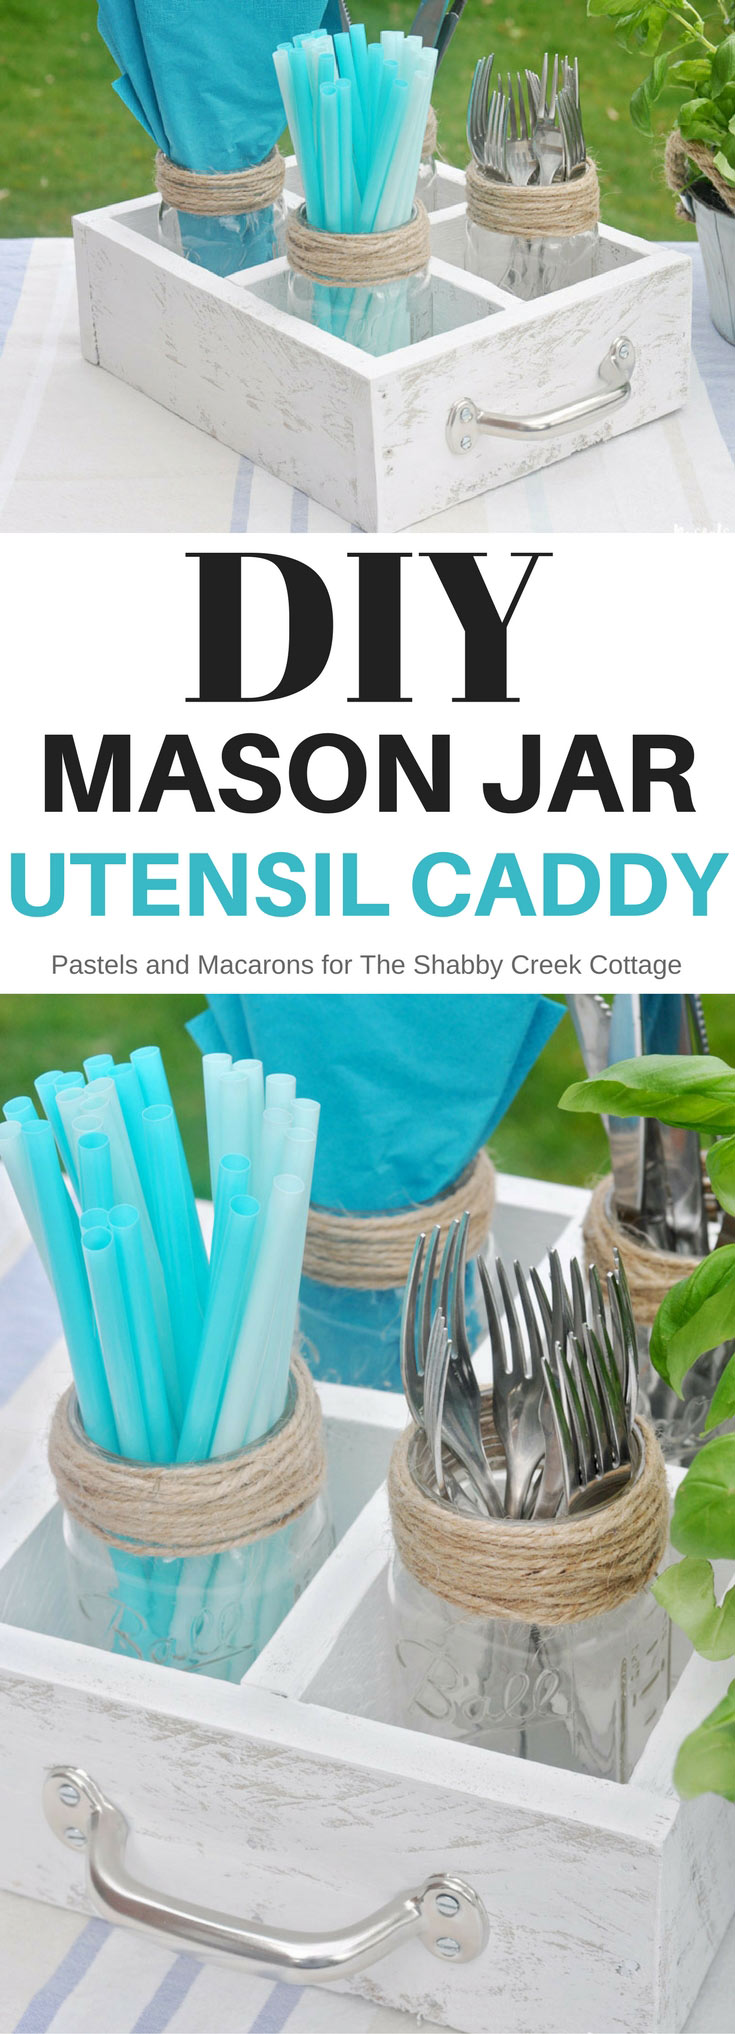 DIY Mason Jar utensil caddy made from wood scraps and under $5!